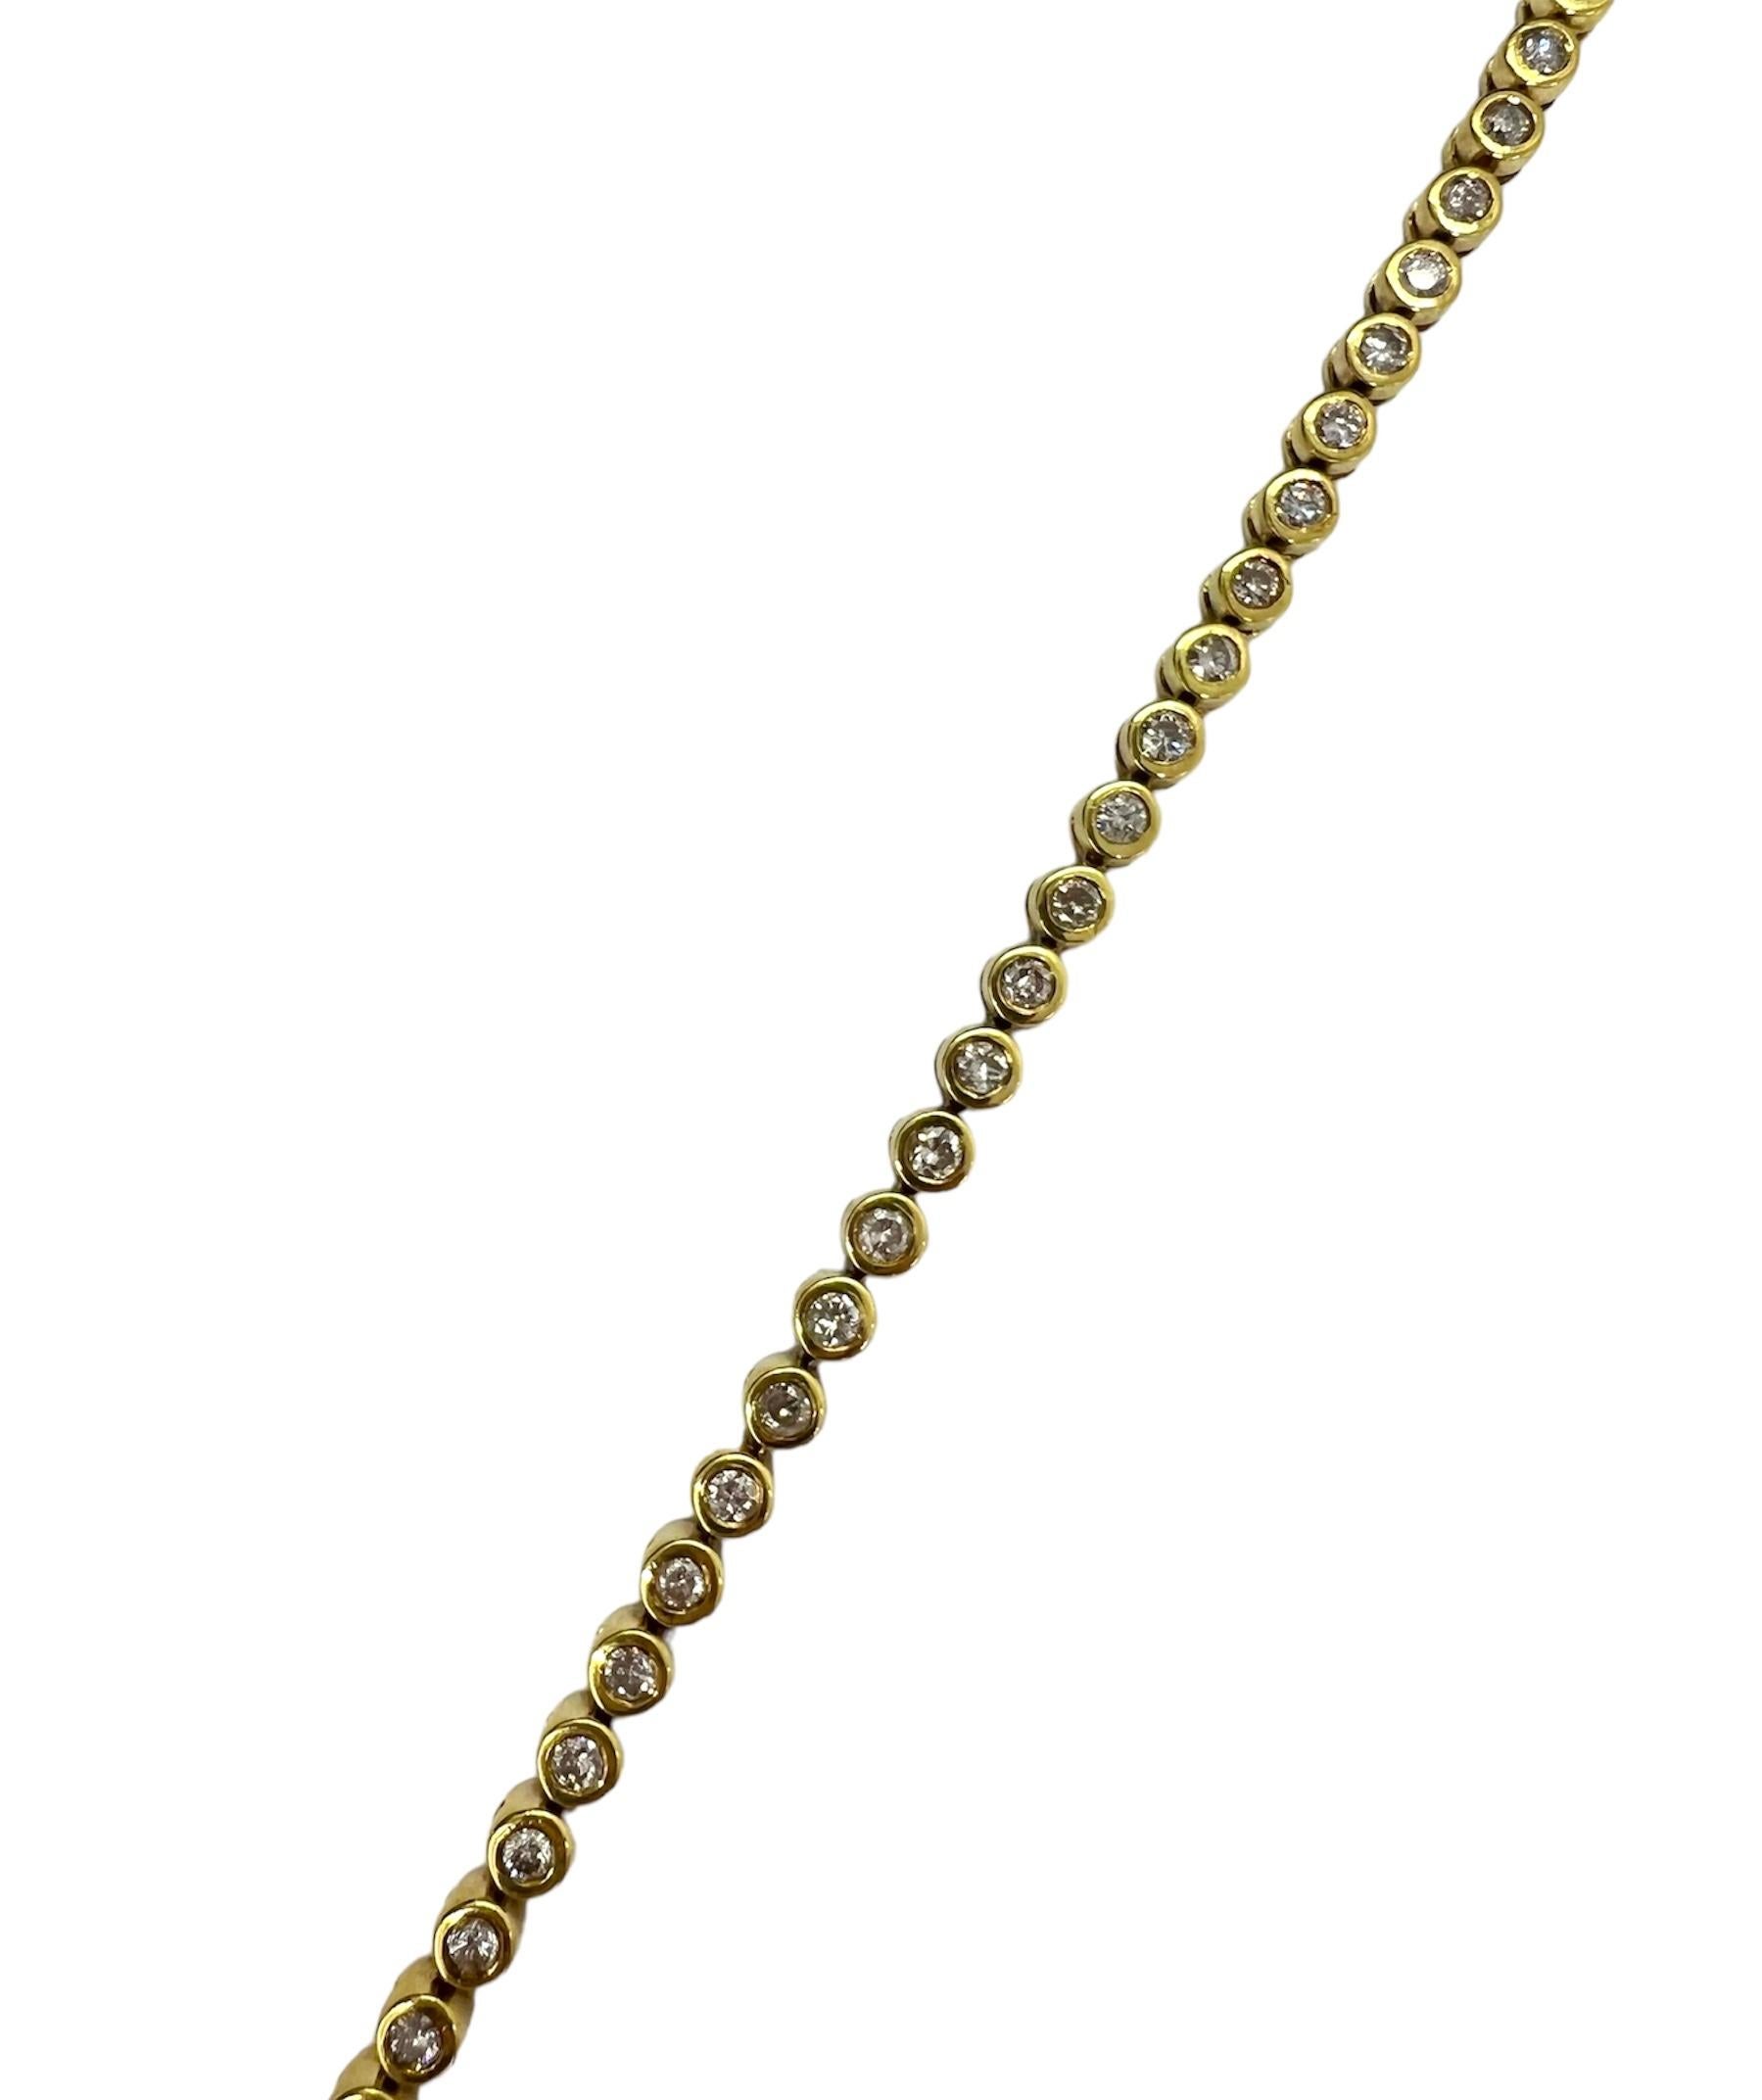 Yellow gold bracelet with 4.10 carat diamonds.

Sophia D by Joseph Dardashti LTD has been known worldwide for 35 years and are inspired by classic Art Deco design that merges with modern manufacturing techniques.
